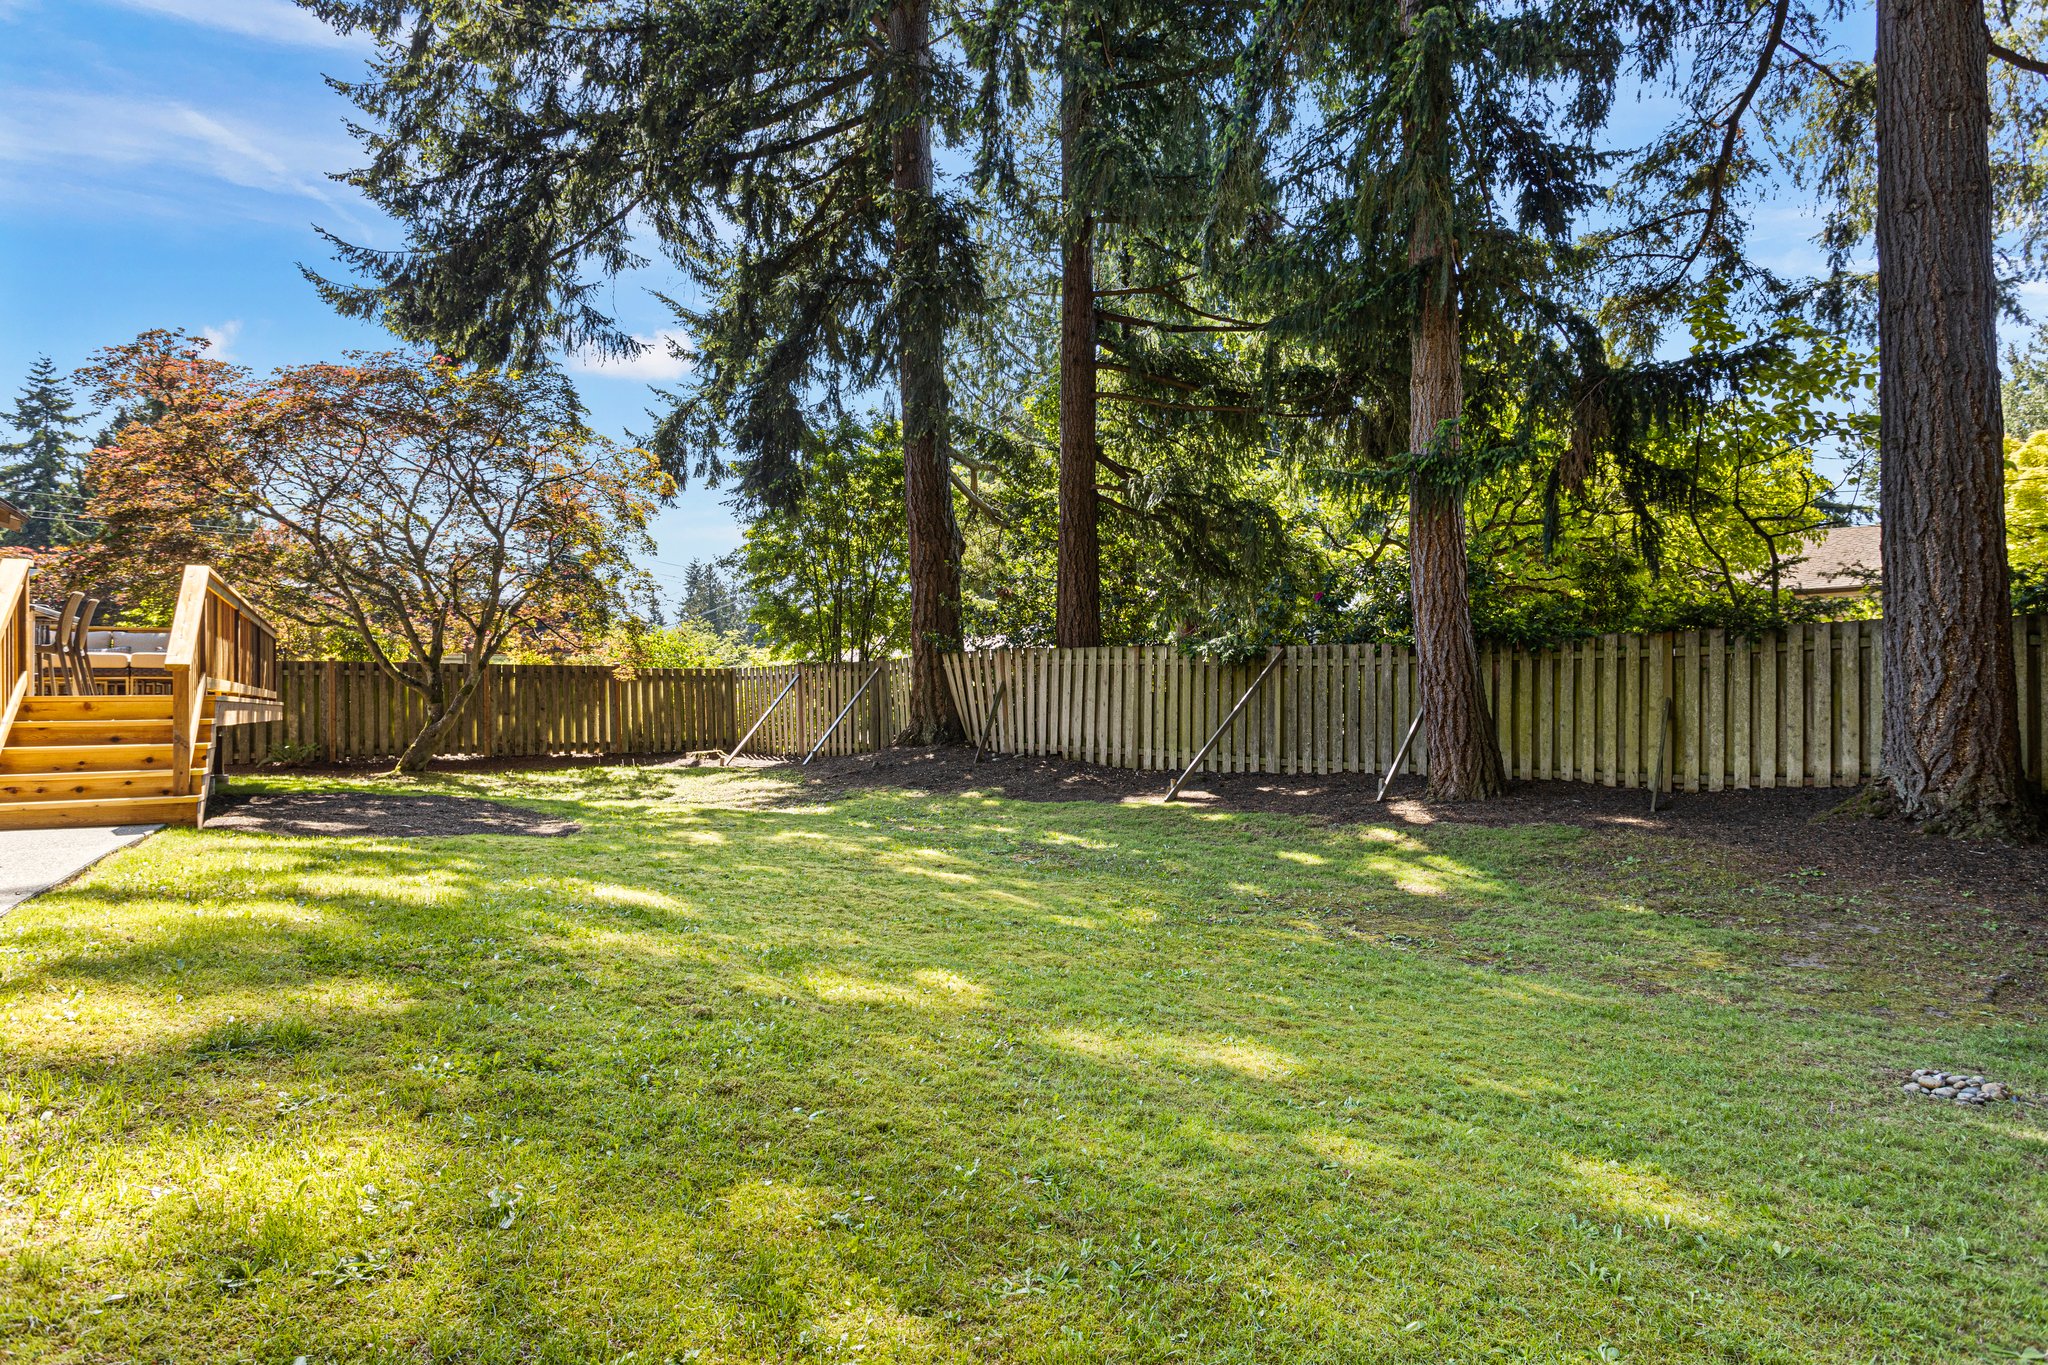 The (almost) fully fenced backyard is spacious enough for gardening, pets, play, and whatever you need! Because there are about ten tall trees (mostly pine), during the sizzling summer, this house stays cool. But if it gets too hot, there is Central AC to count on. The house is surrounded by trees, providing plentiful fresh air and oxygen 24/7. From time to time, at night, when everything is quiet, there is the distant sound of a ship (quiet ‘bhooo’ sound) from Puget Sound, like living in a peaceful ocean town.